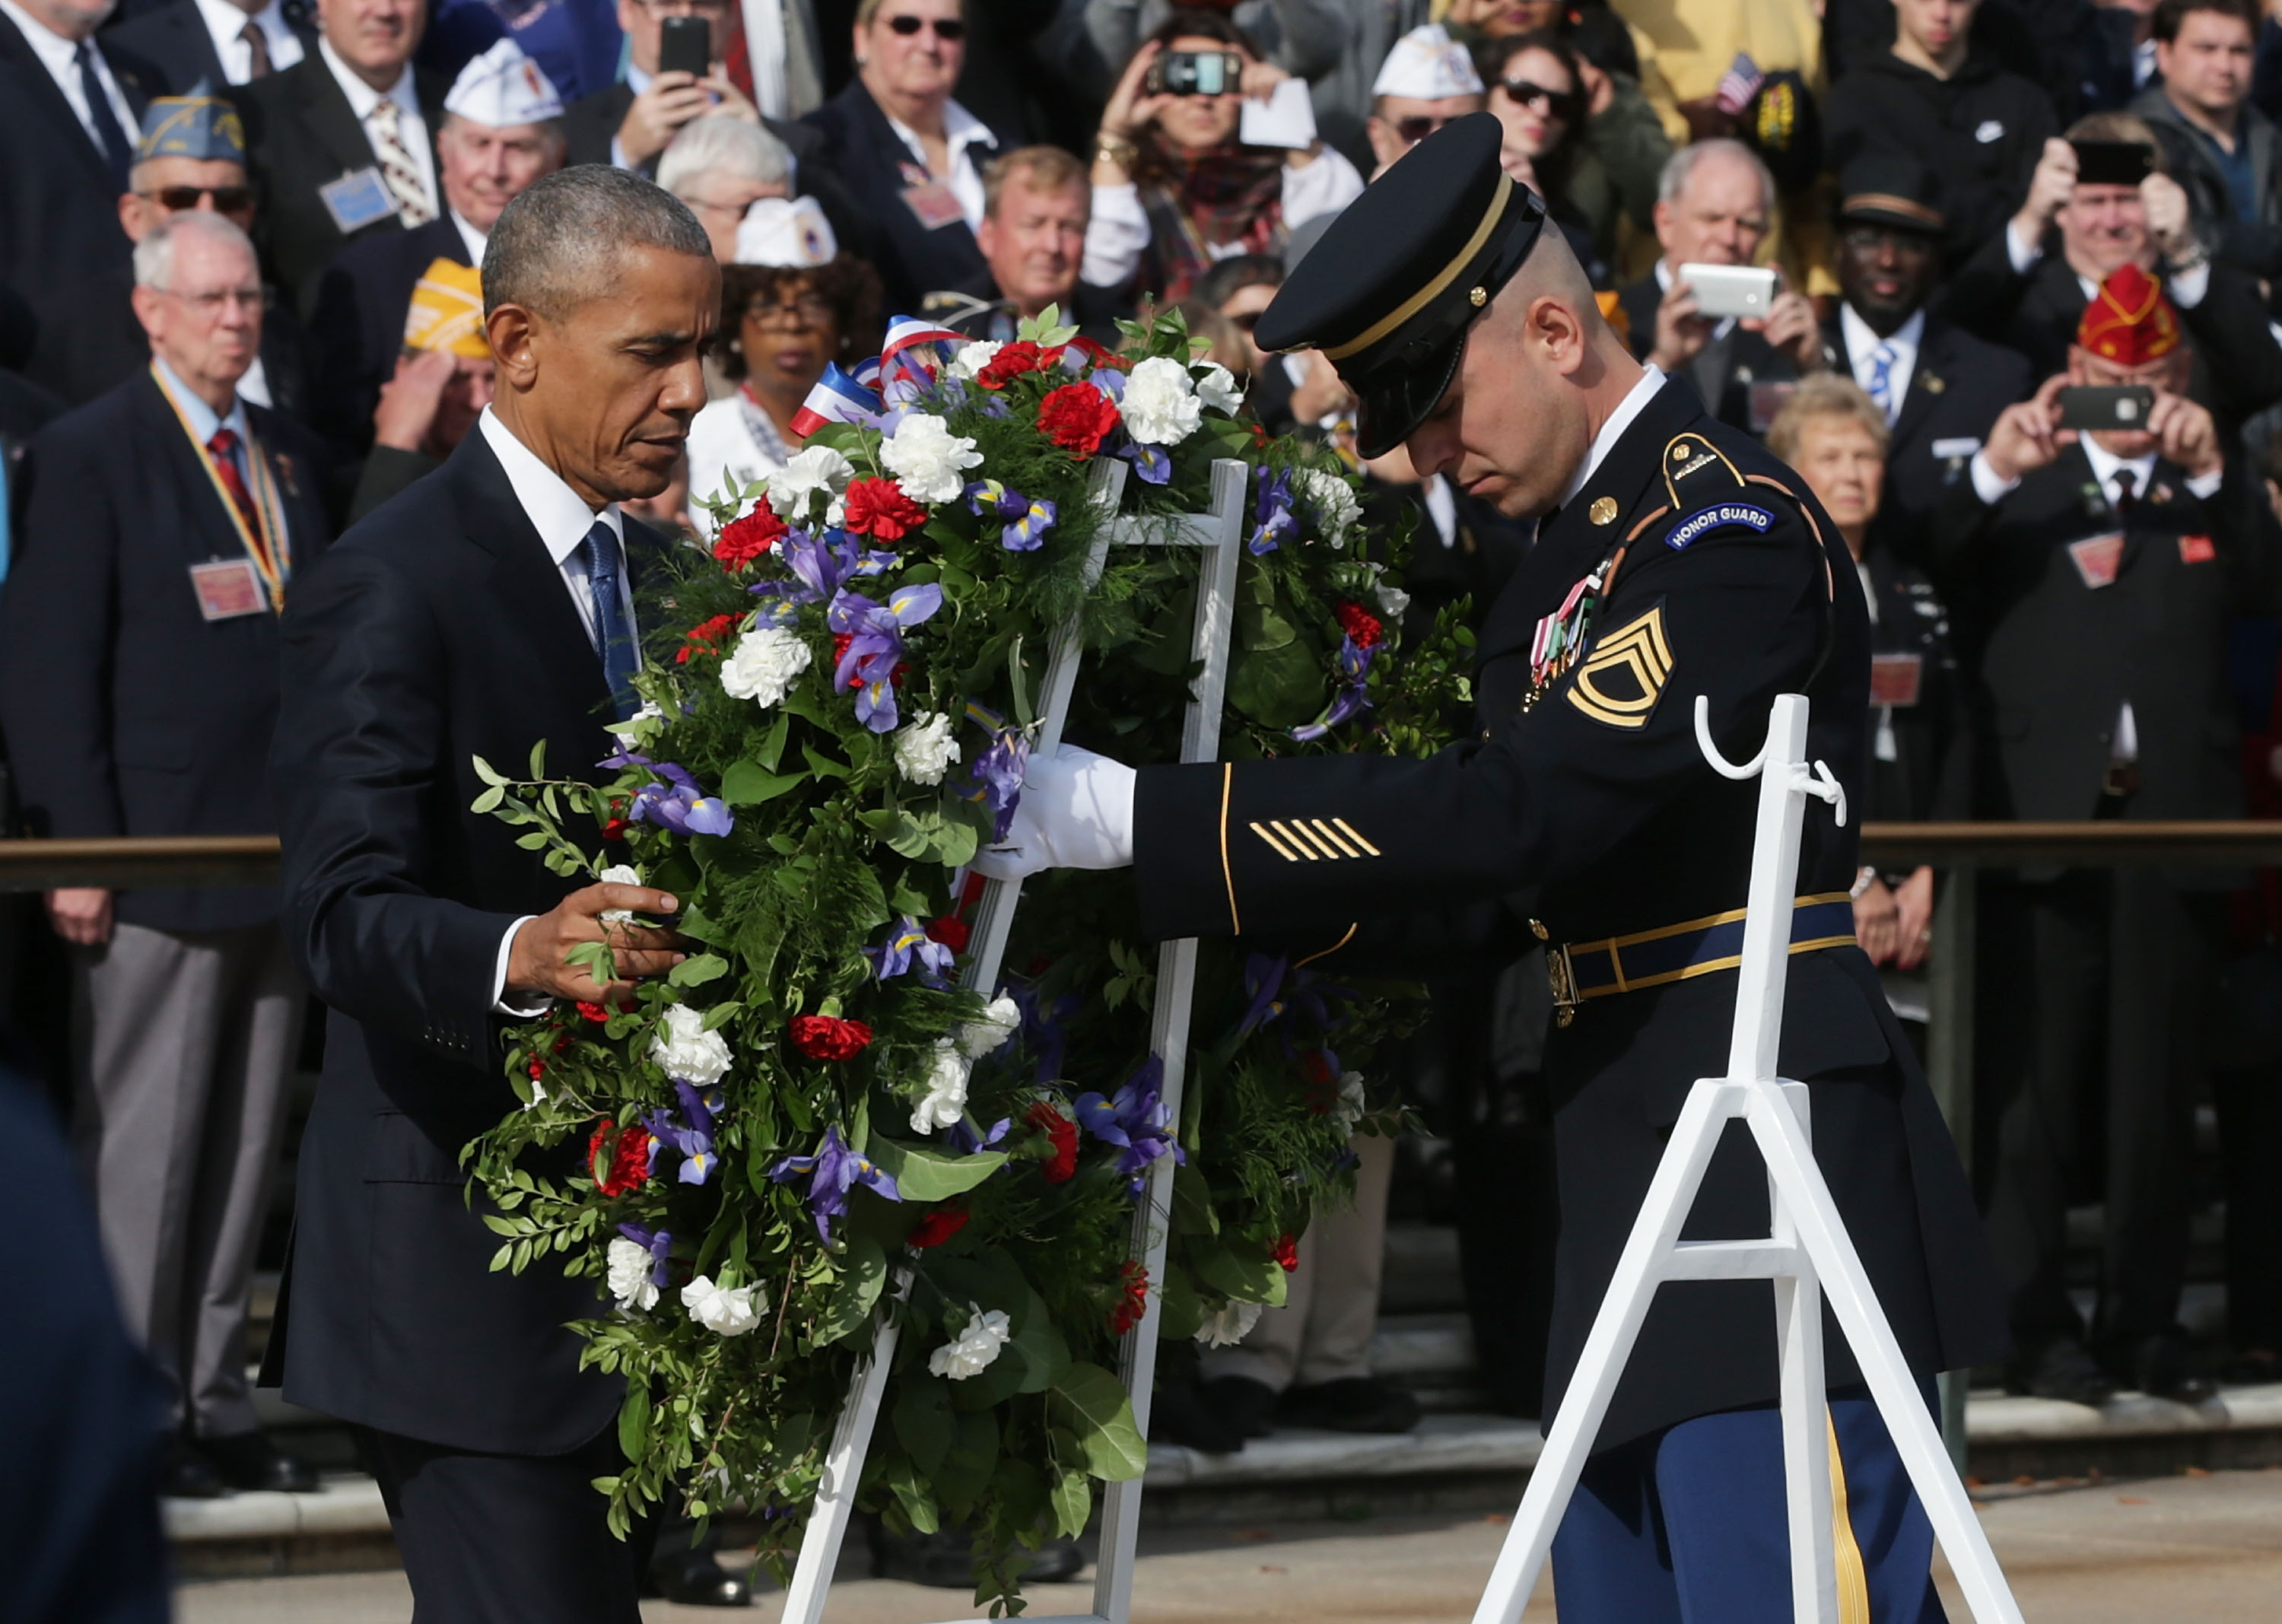 U.S. President Barack Obama participates in a wreath-laying ceremony at the Tomb of the Unknown Soldier at Arlington National Cemetery on Veterans Day November 11, 2016 in Arlington, Virginia. The annual Veterans Day National Ceremony was held at the cemetery to honor Americans who had served in the U.S. Armed Forces. (Alex Wong—Getty Images)